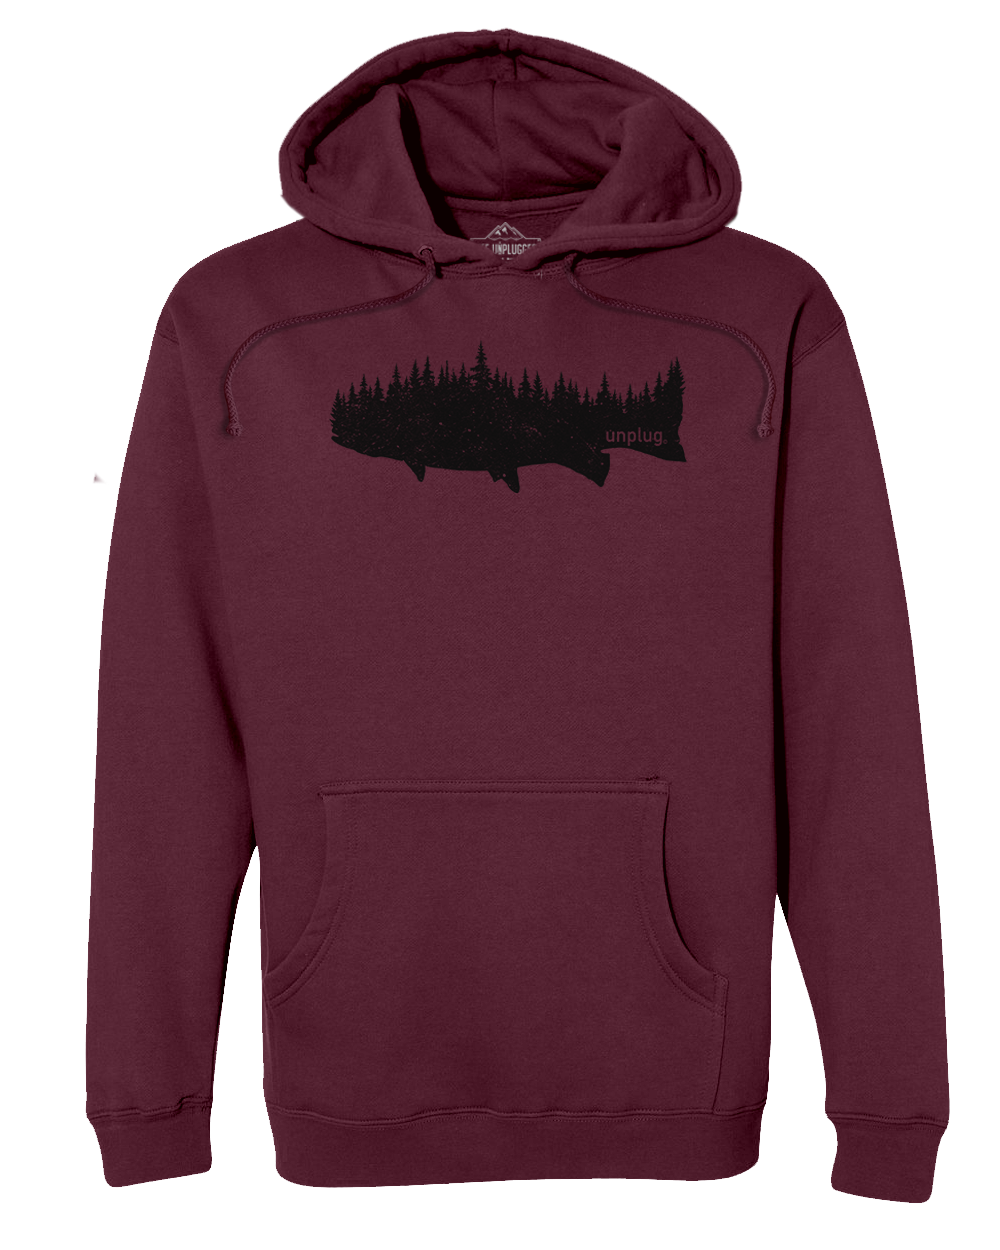 TROUT IN THE TREES Premium Heavyweight Hooded Sweatshirt